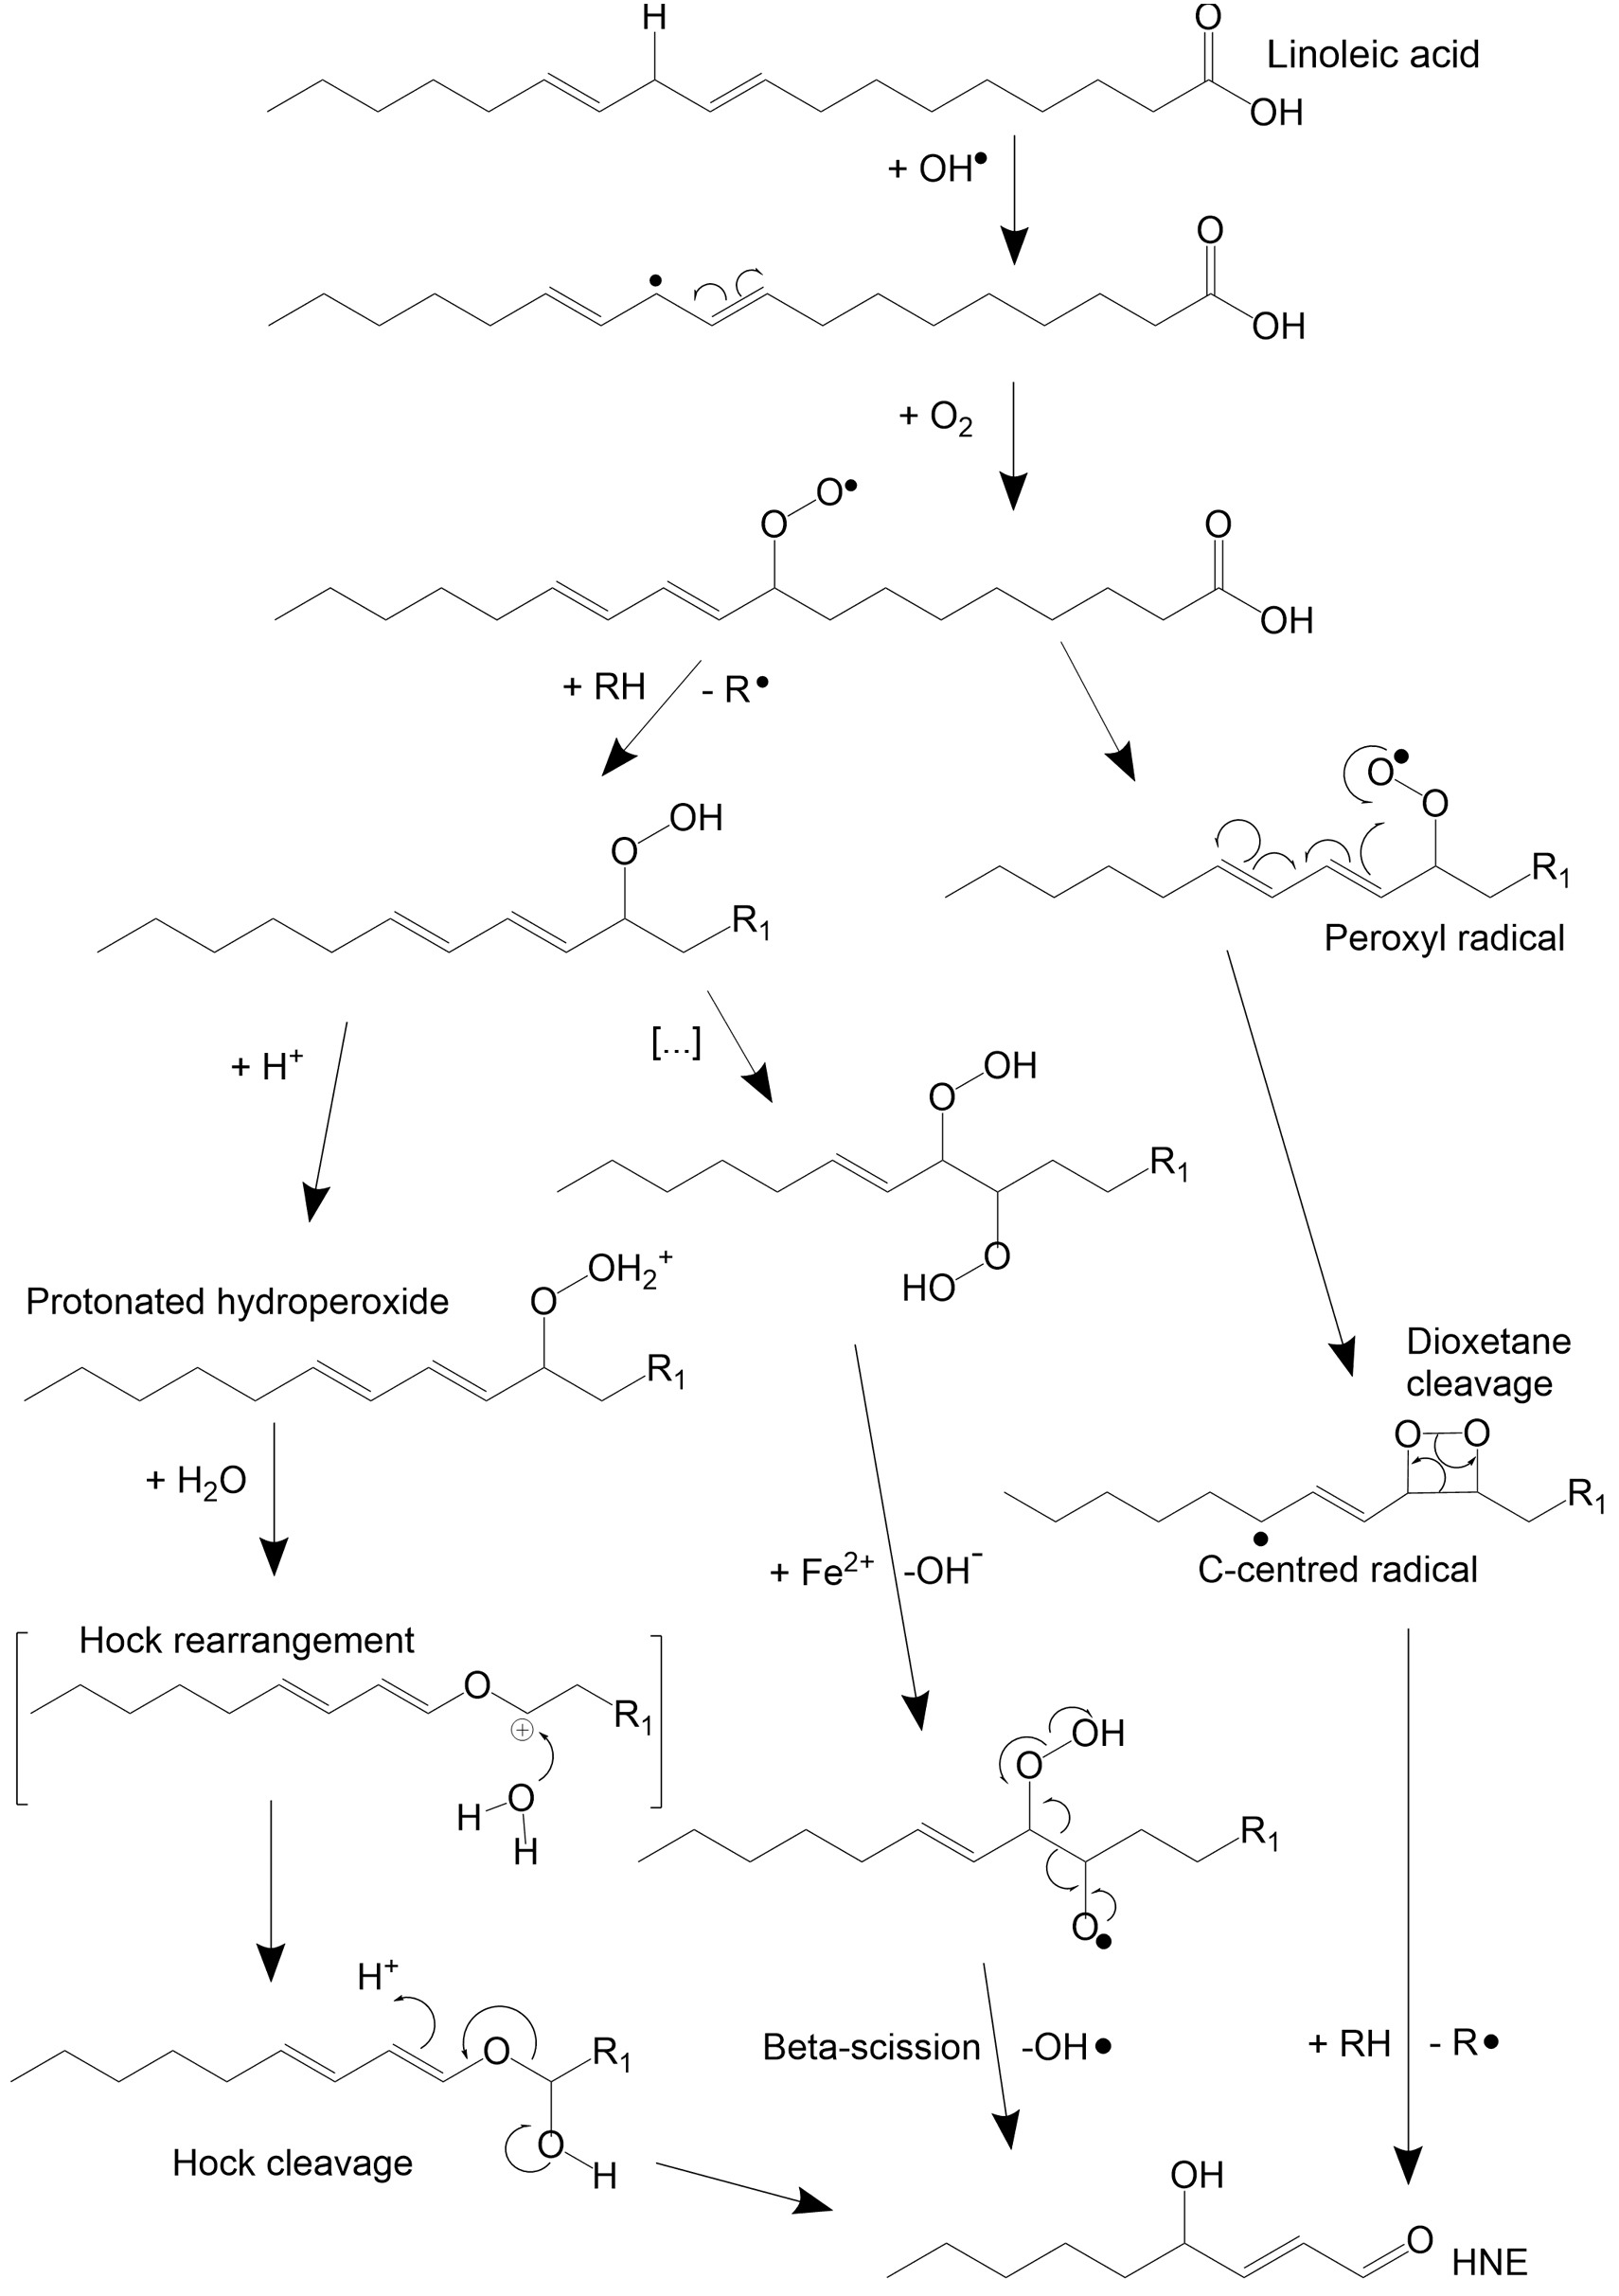 Suggested mechanisms for lipid peroxidation